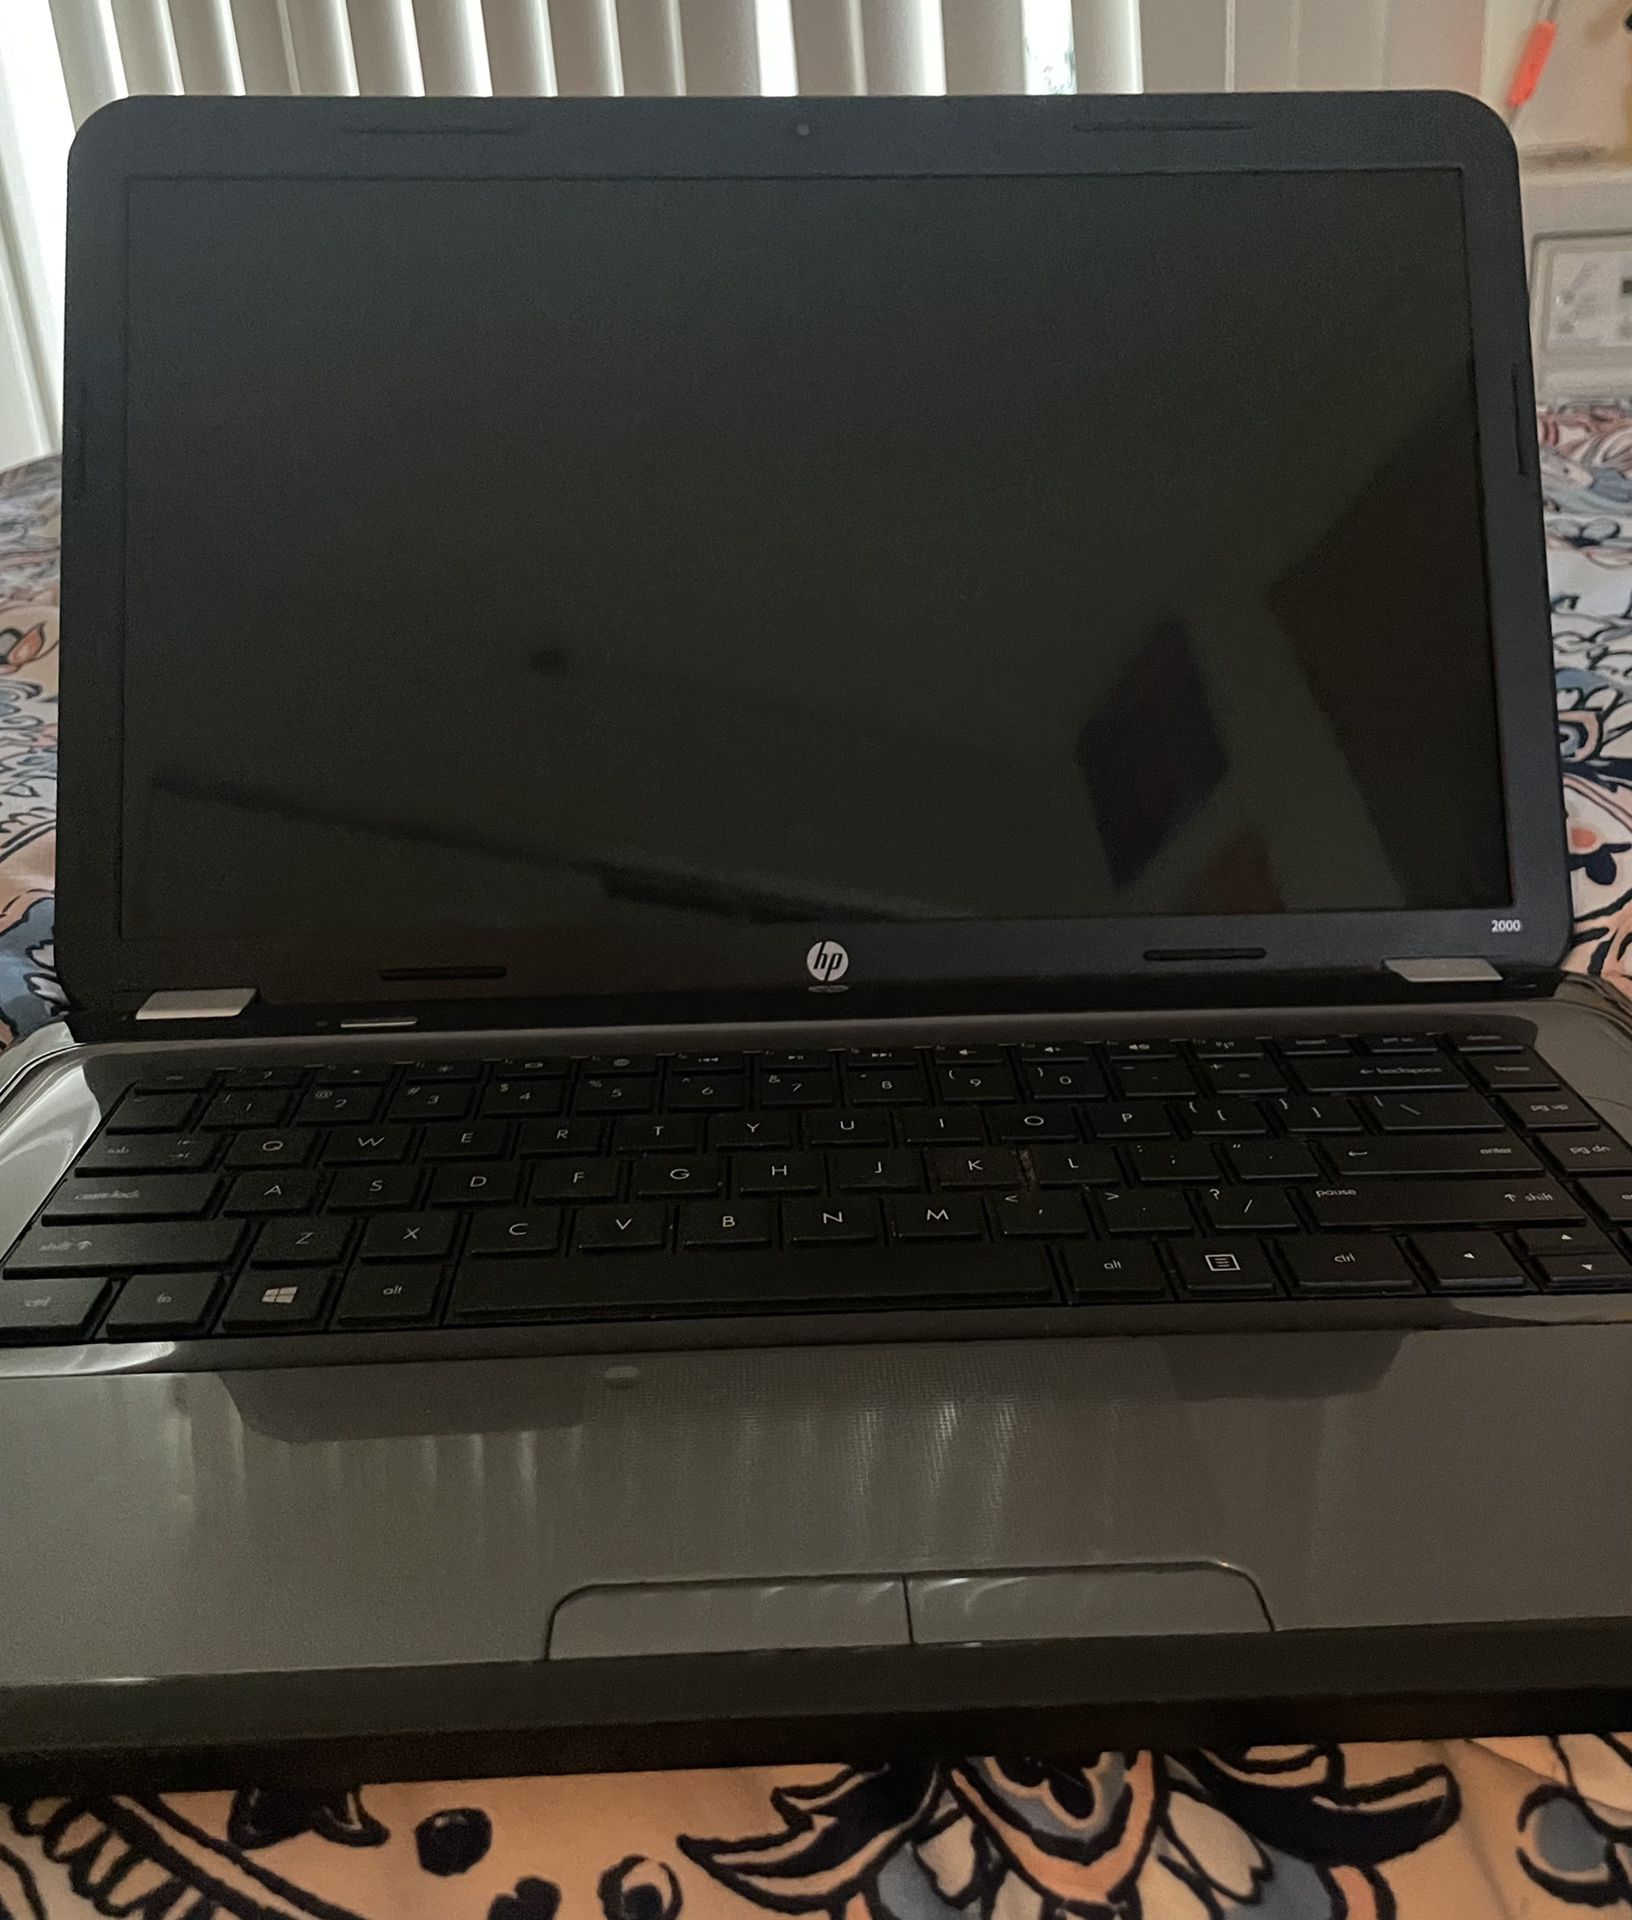 HP 2000 Notebook Laptop (Late 2012)